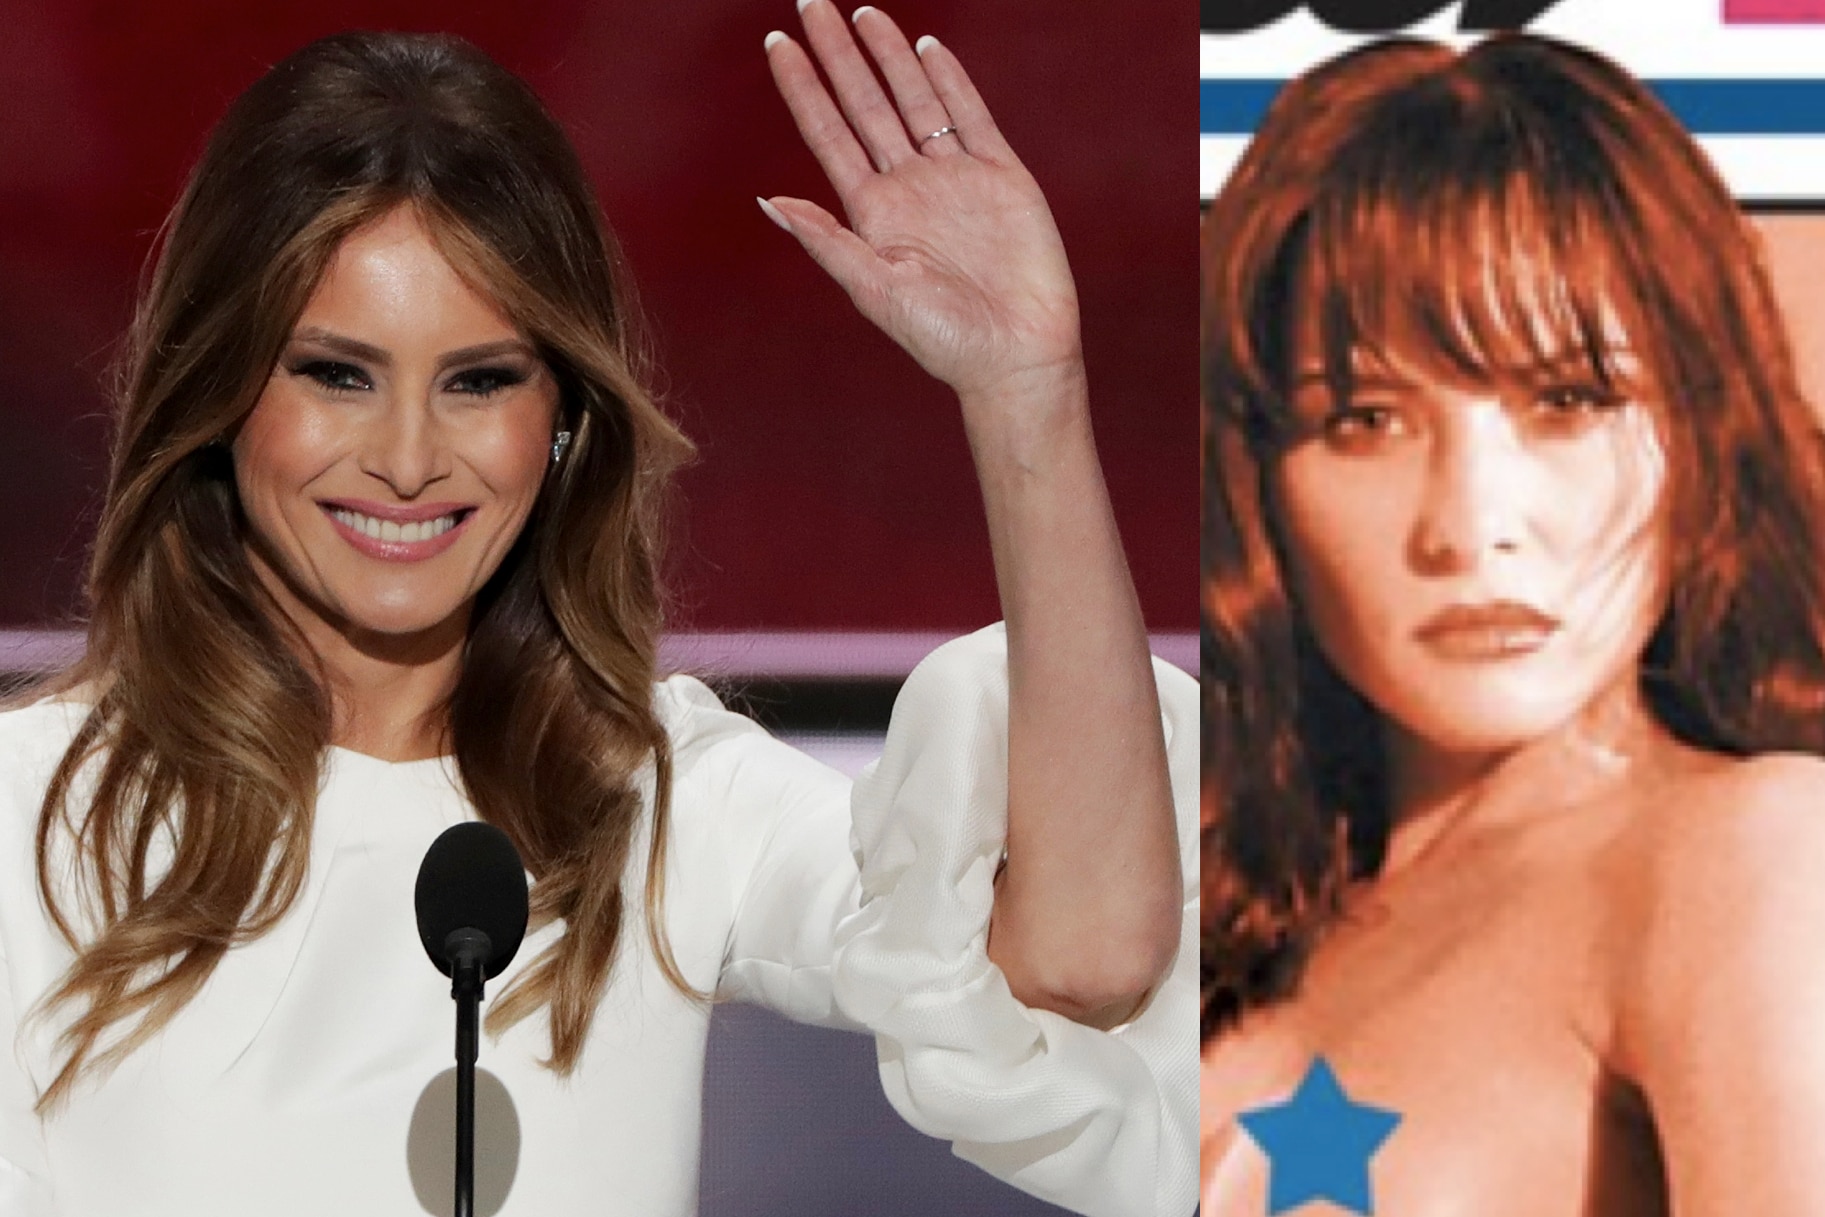 New York Post publishes fully nude photo of Melania Trump 